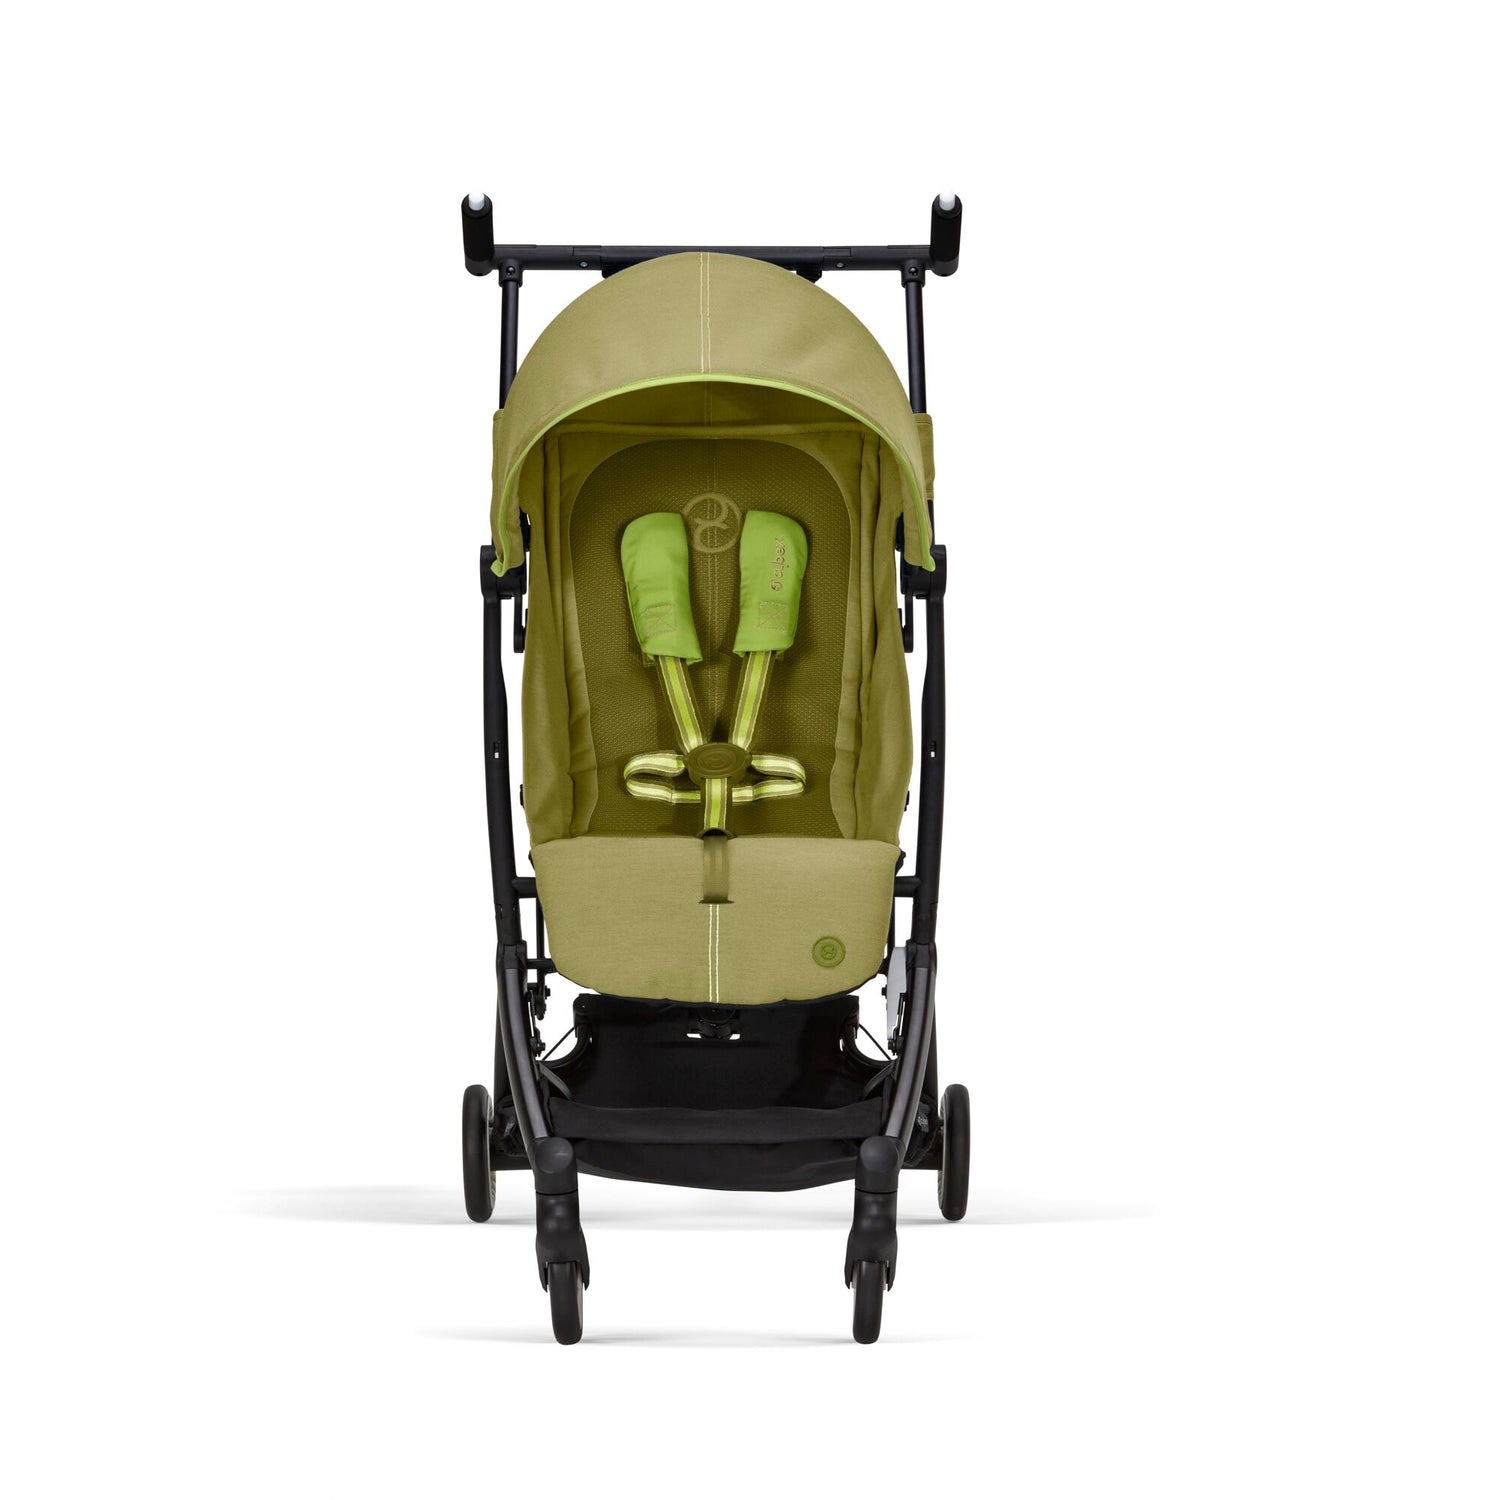 Buggy LIBELLE Cybex Gold bei www.harmony-ambiente.at | Buggy Libelle Nature Green